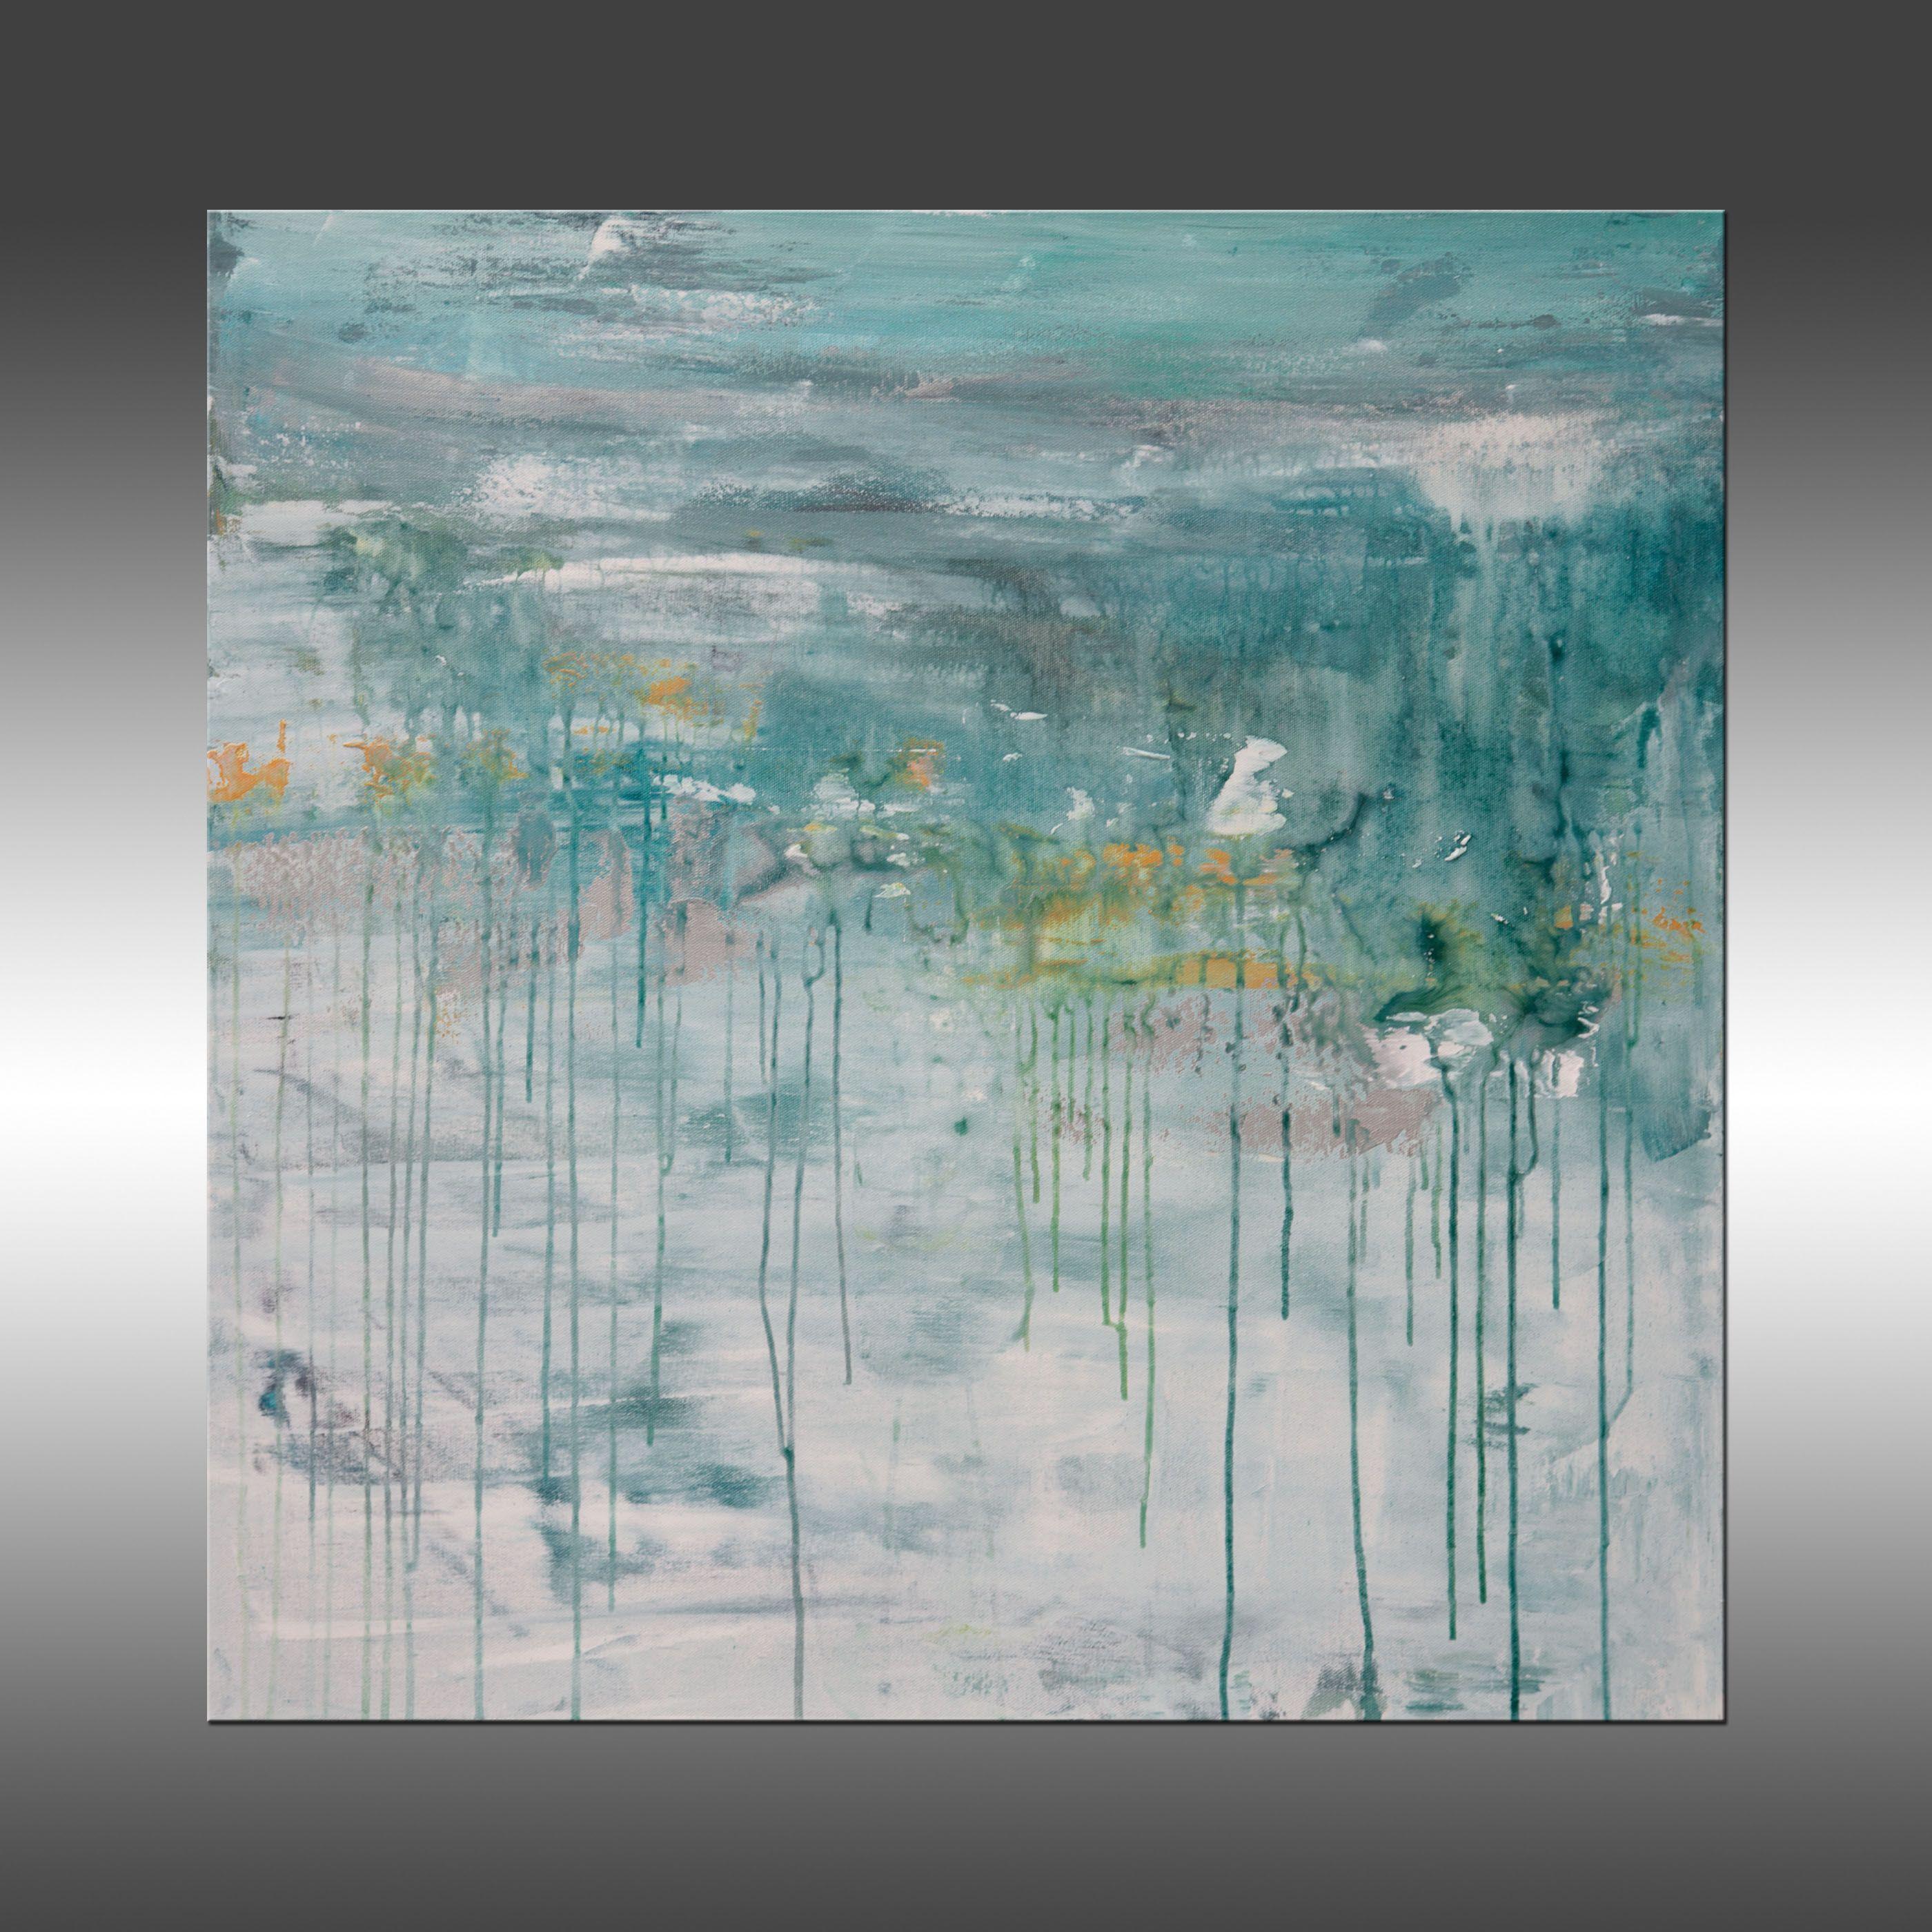 Lithosphere 205 is an original painting, created with acrylic paint on gallery-wrapped canvas. It has a width of 30 inches and a height of 30 inches with a depth of 1.5 inches (30x30x1.5).    The colors used in the painting are white, gray, blue,